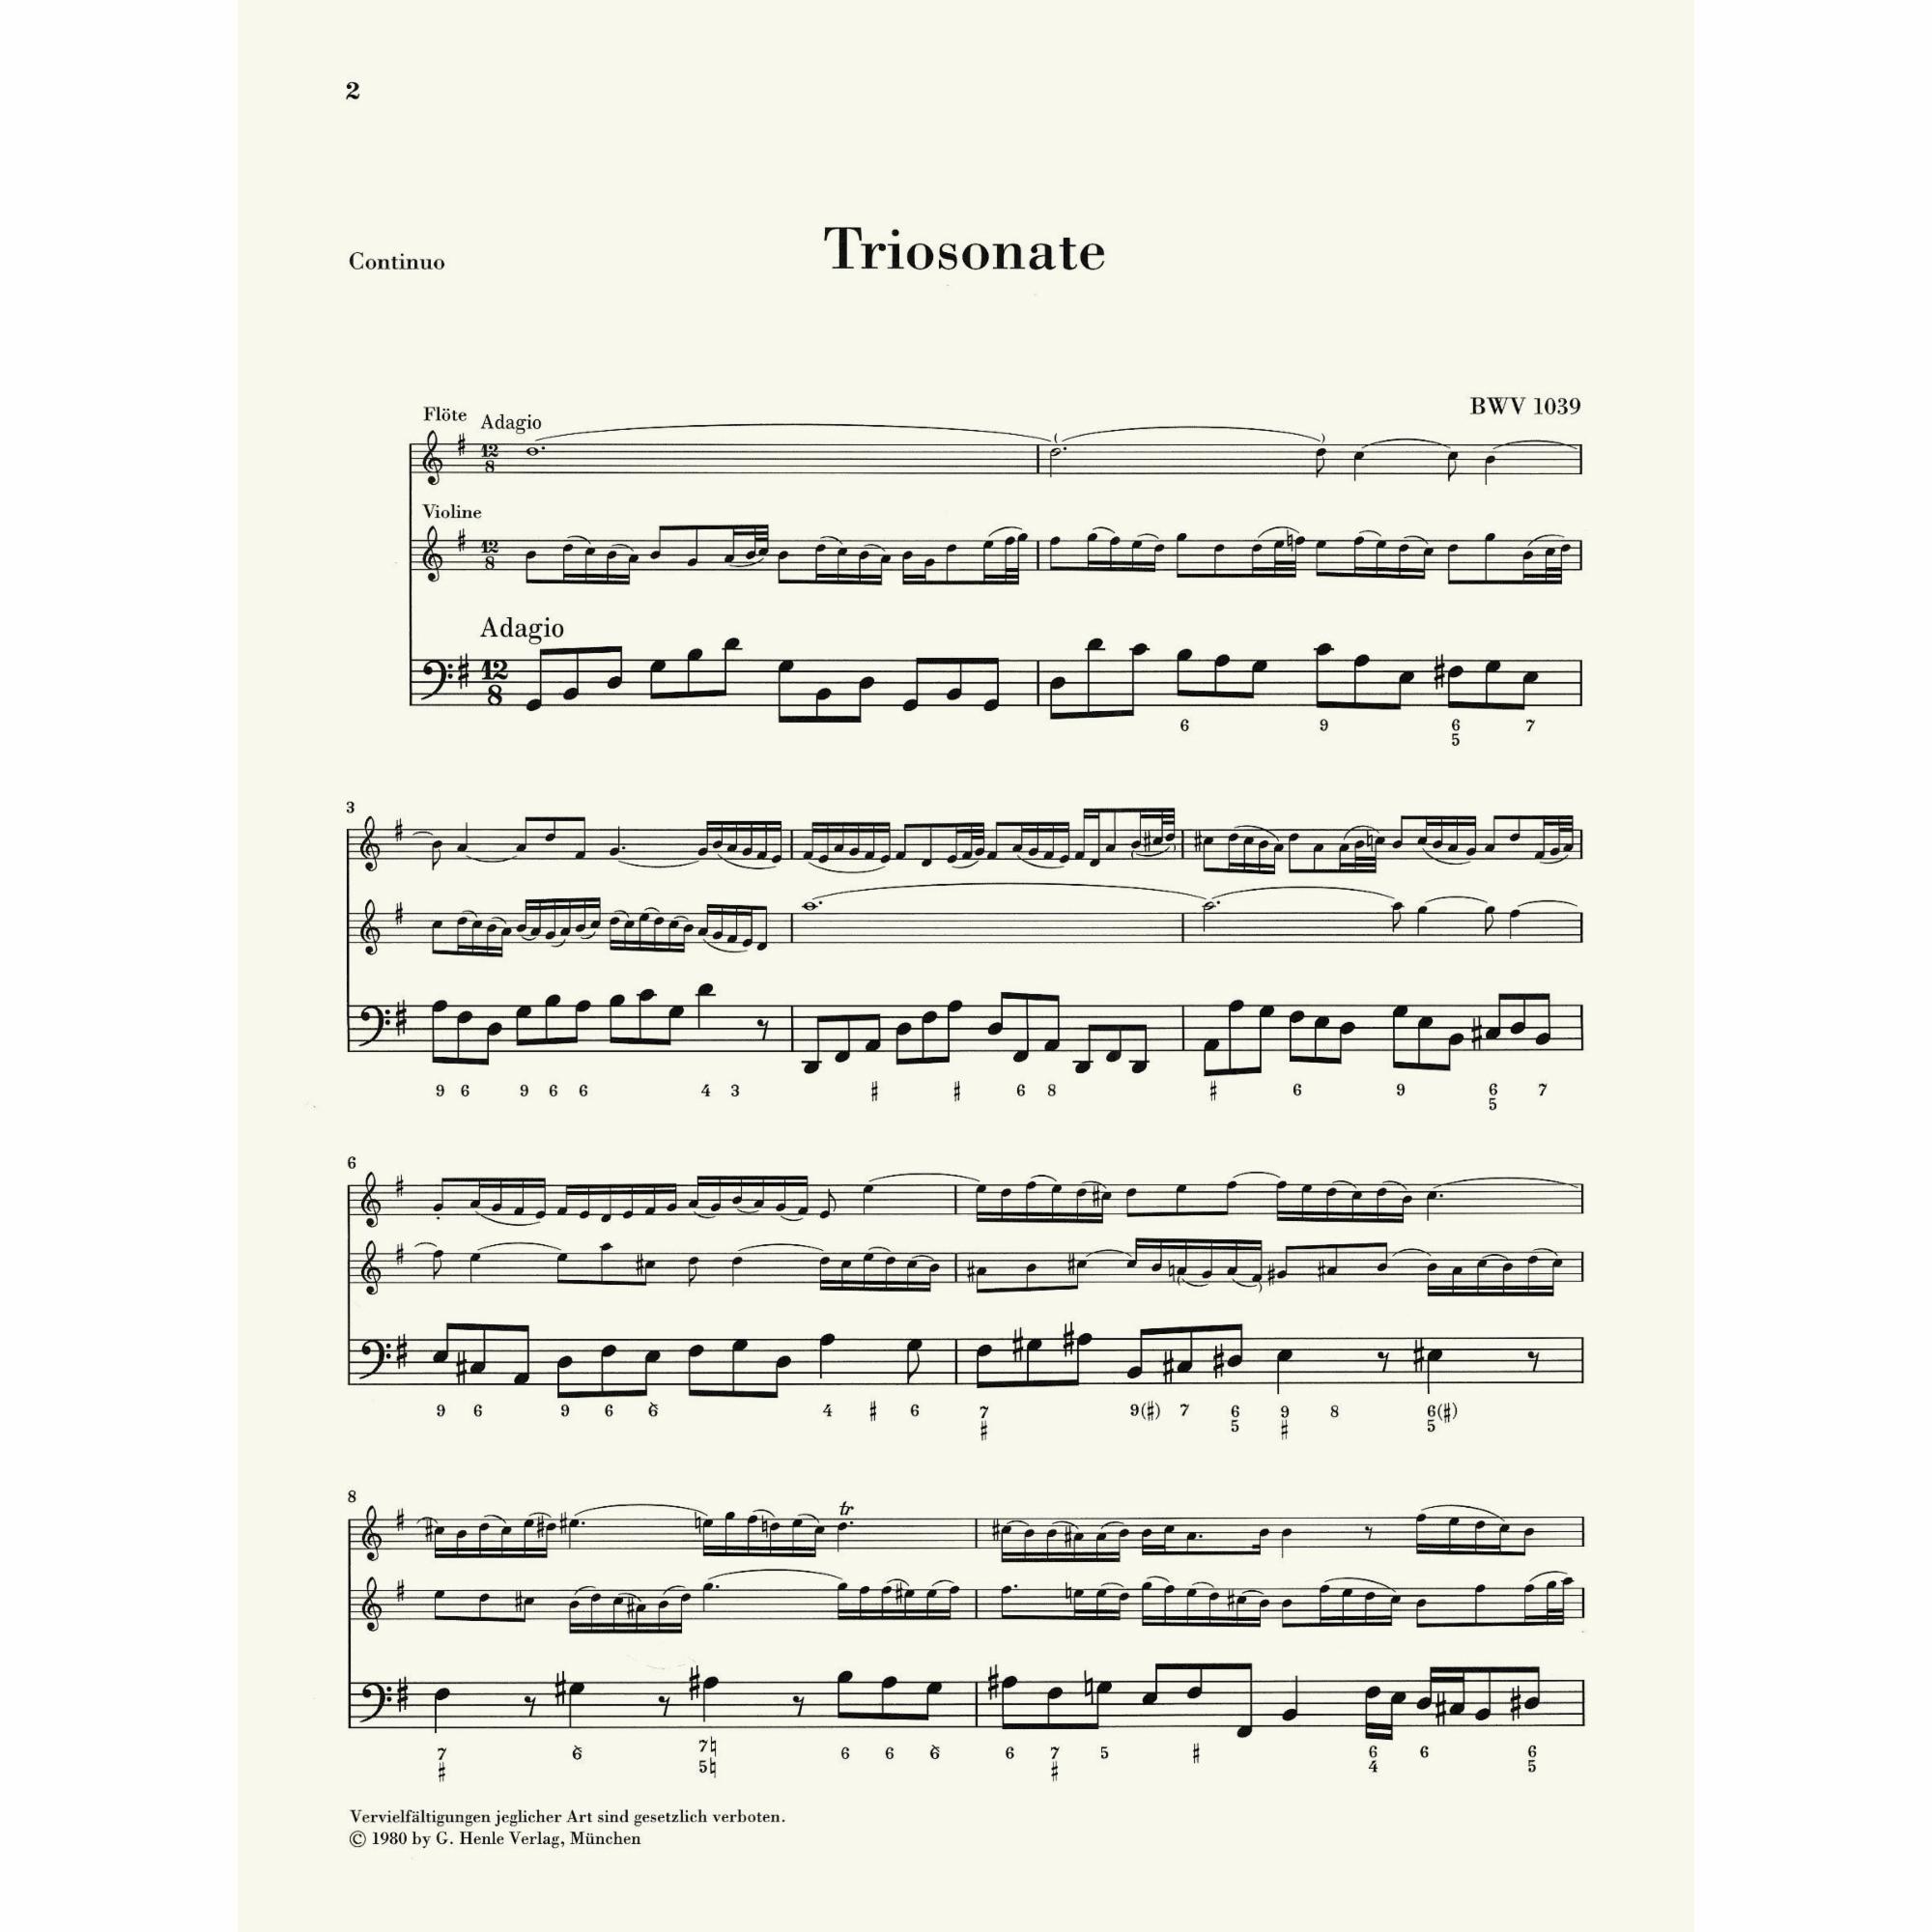 Sample: Unrealized Bass (Pg. 2)